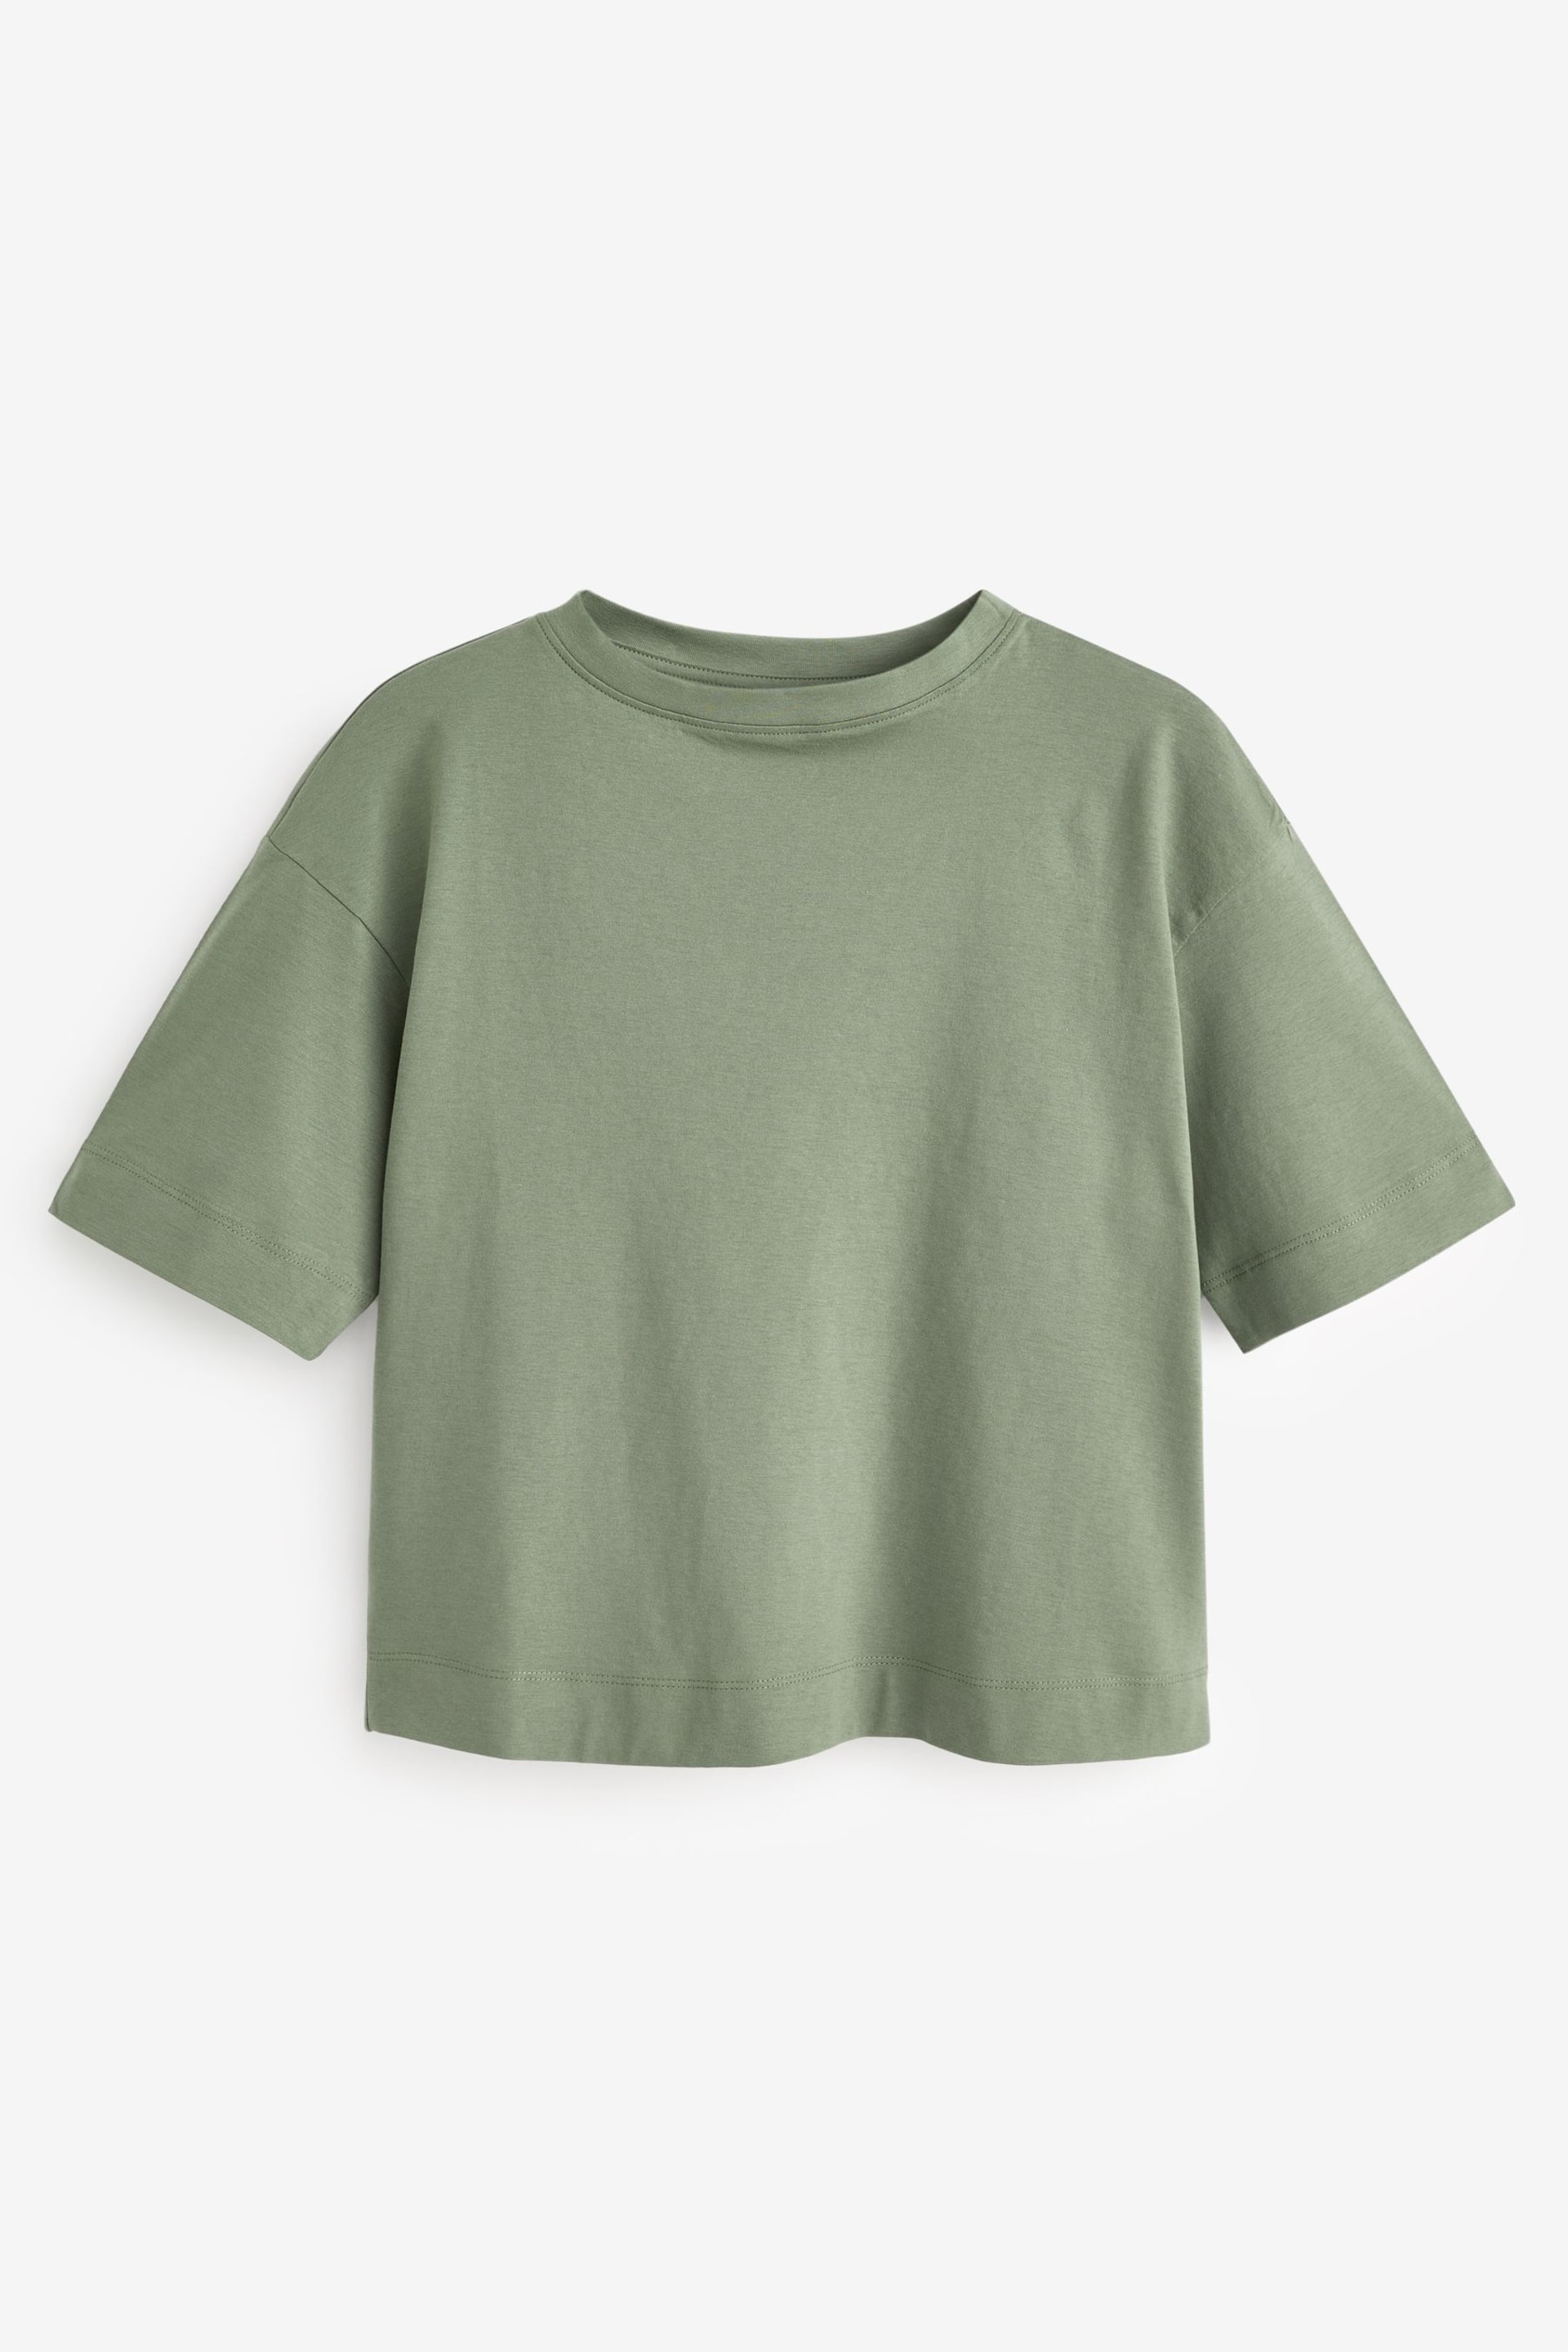 Khaki Green Boxy Relaxed Fit T-Shirt - Image 4 of 4